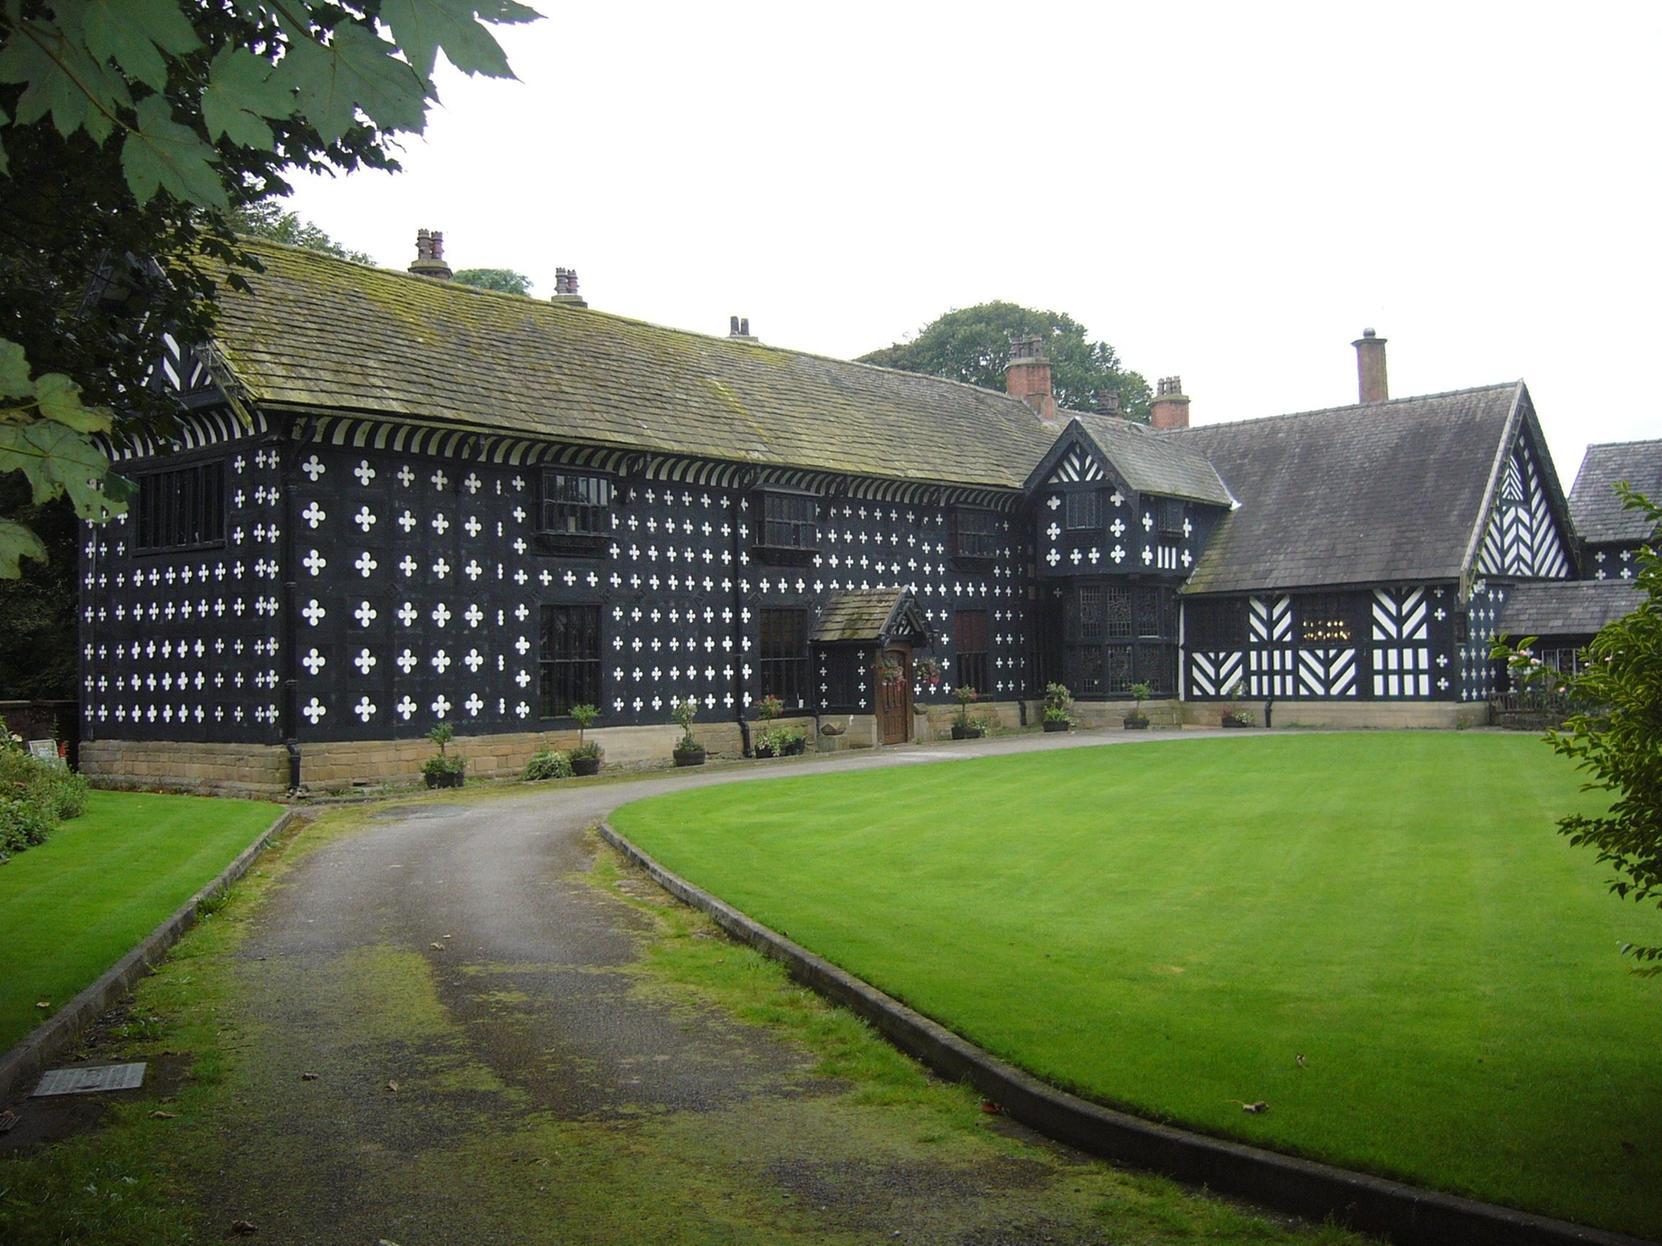 Samlesbury Hall, Preston New Road, Samlesbury, PR5 0UP
Samlesbury Hall is one of the stunning stately homes of Lancashire, a haven for history lovers, where the past meets the present - a fantastic, family day out. A fabulous half-timbered black and white medieval house built in 1325 as a family home, the Hall is beautifully maintained for the enjoyment of todays visitor.
Visit www.samlesburyhall.co.uk/ for more details.